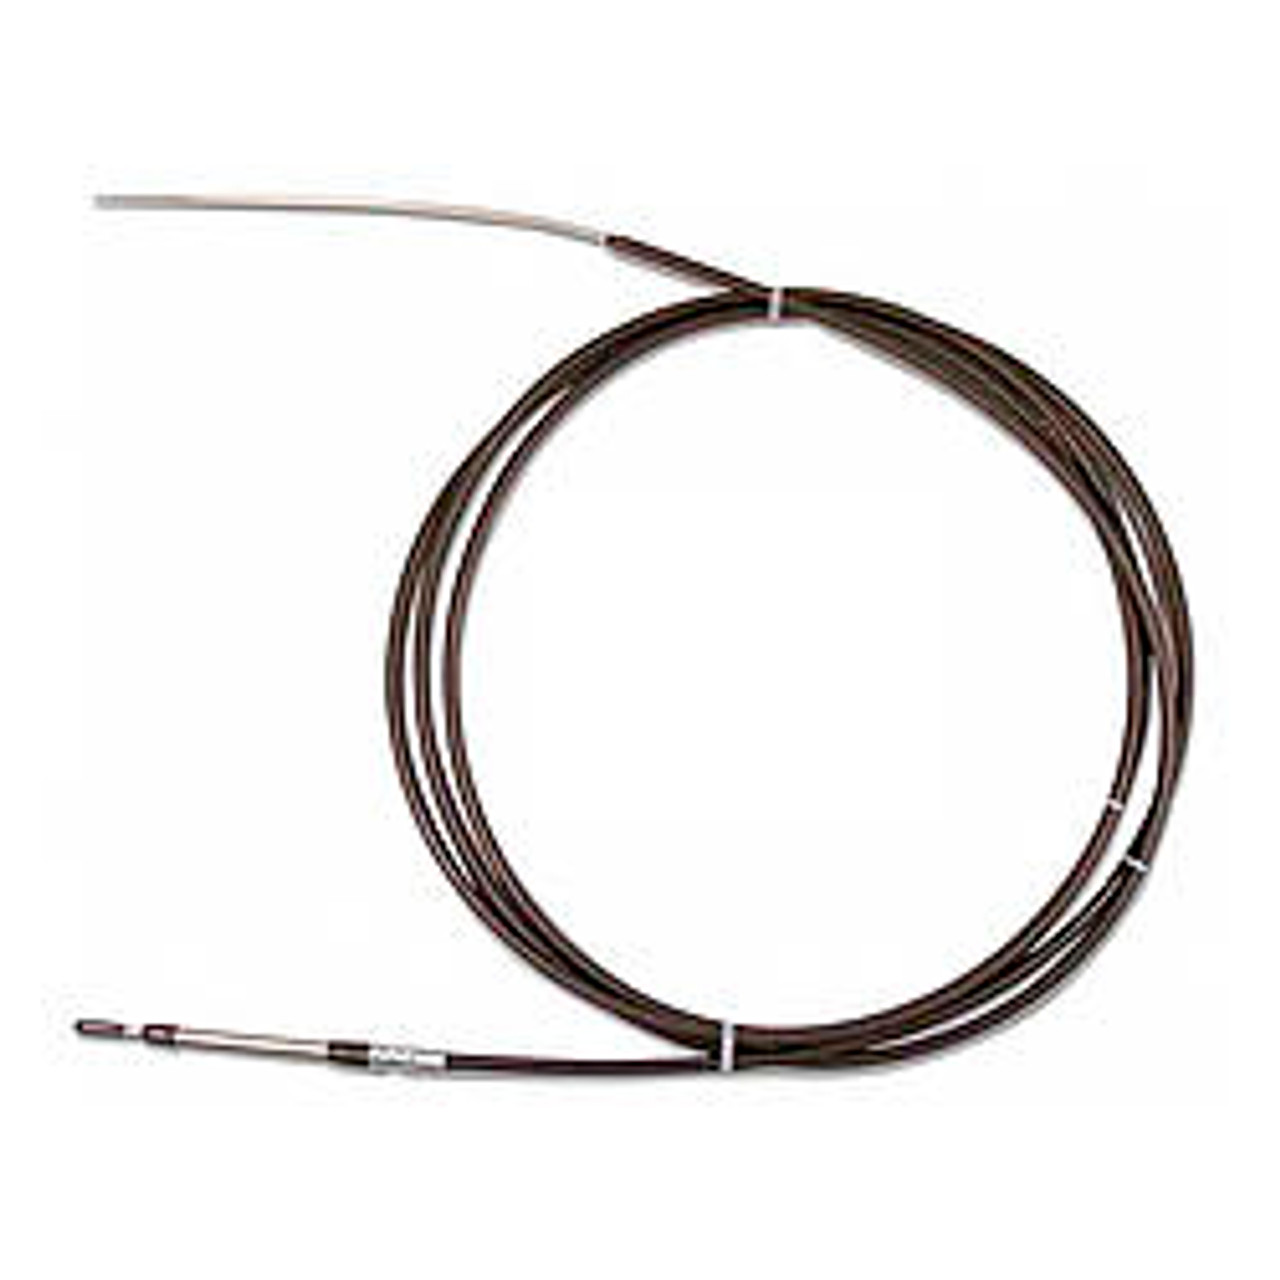 Stroud Chute Release Cable Only - STR542